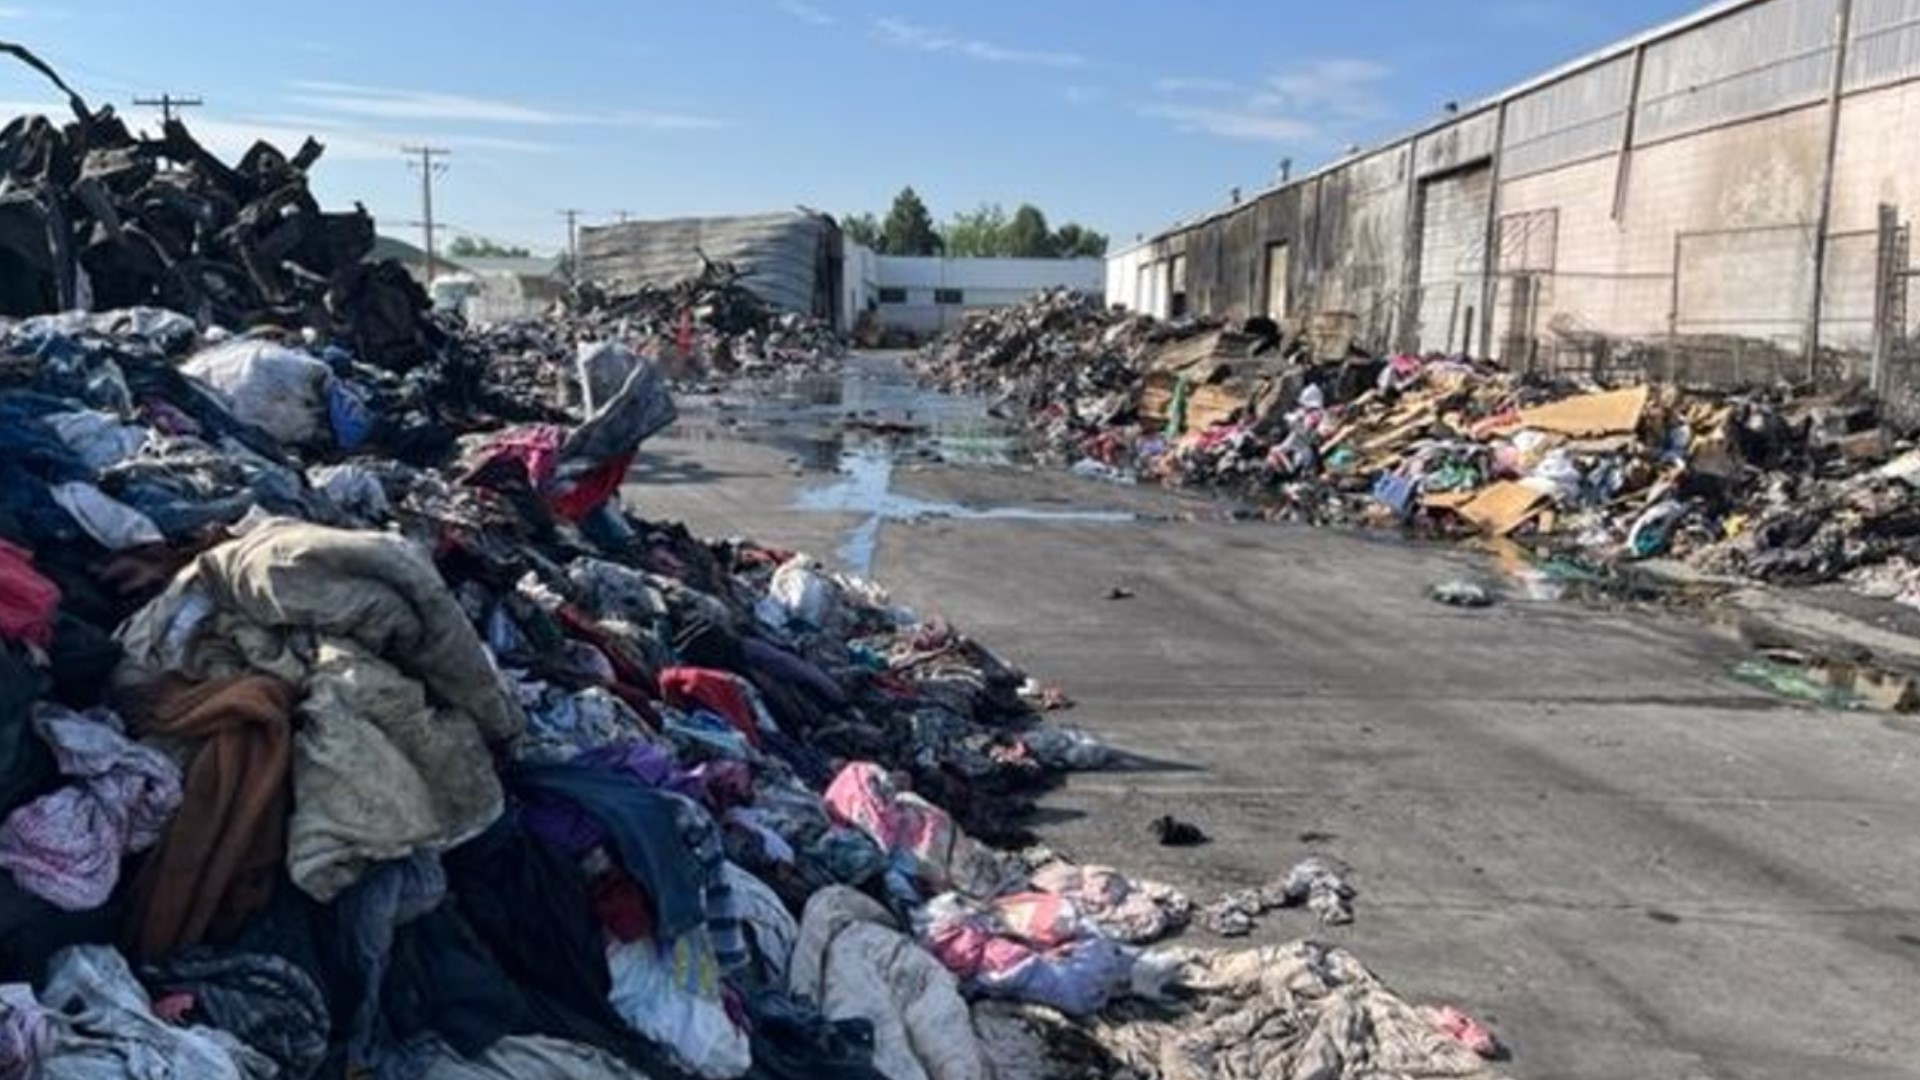 KTVB got a behind the scenes look at the damage done to the Idaho Youth Ranch's Boise distribution center by the July 18 fire.